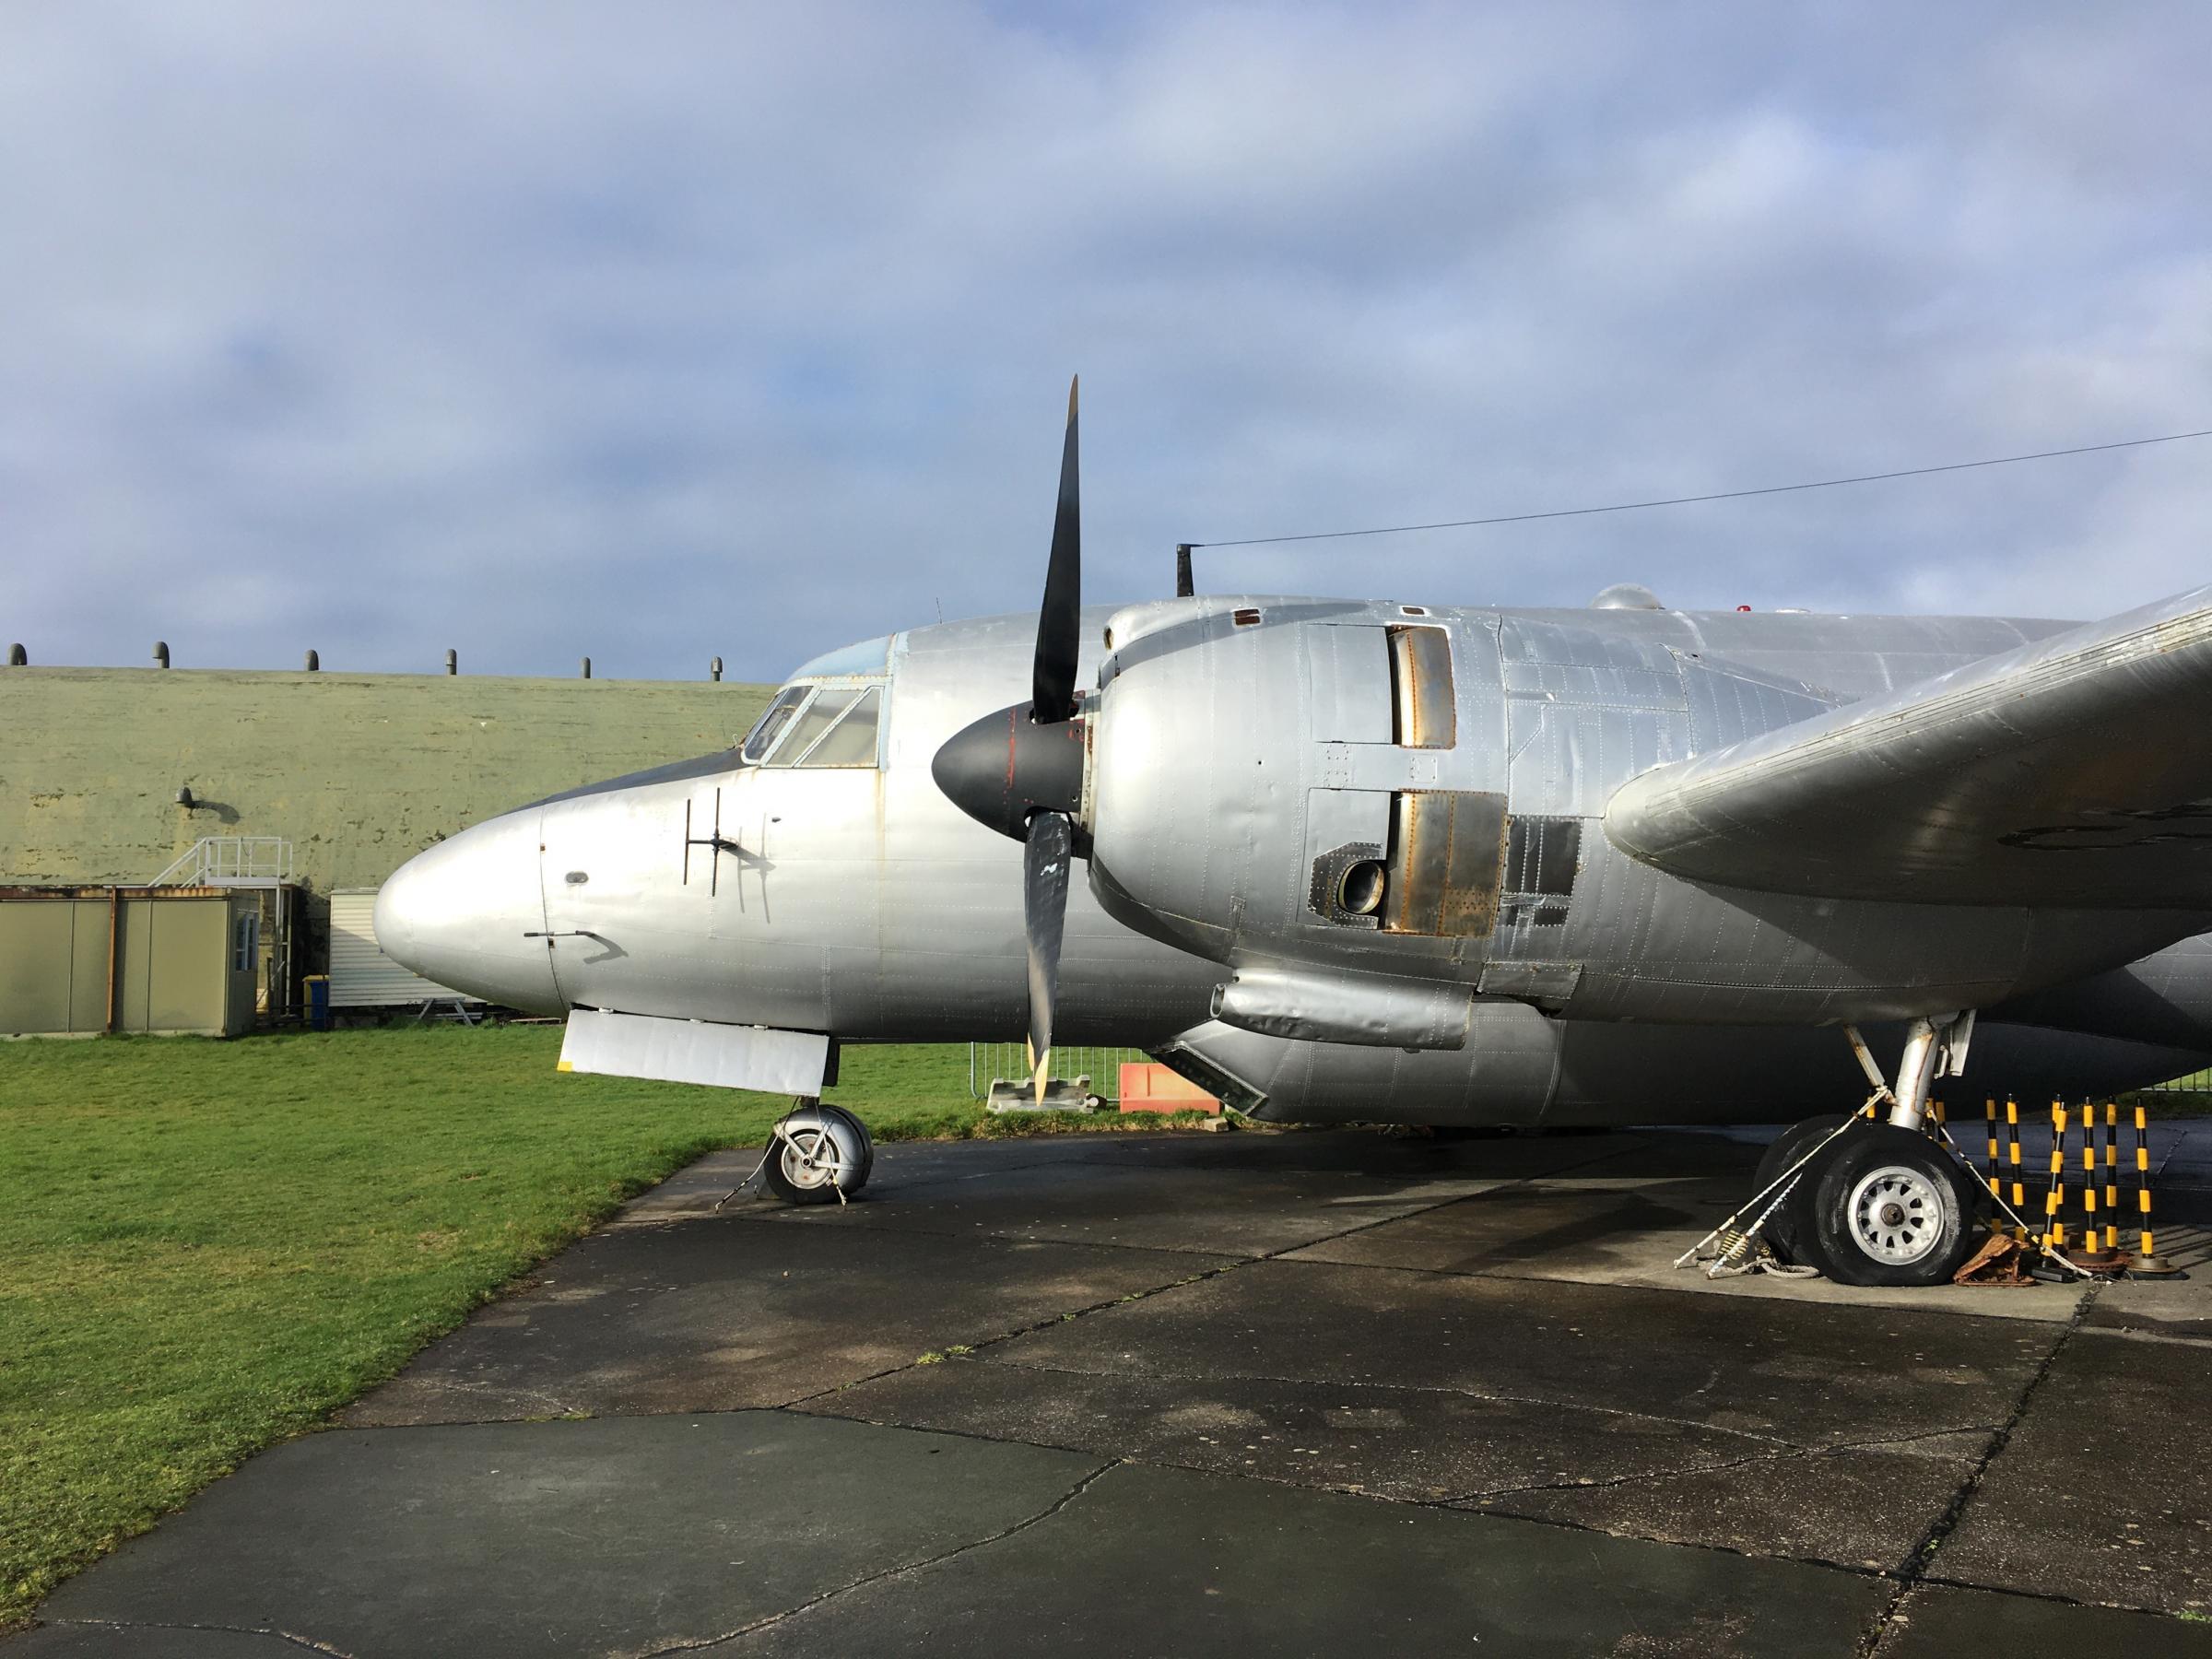 Some of the aircraft at Cornwall Aviation Heritage Centre at RAF St Mawgan (Image: Richard Whitehouse/LDRS)